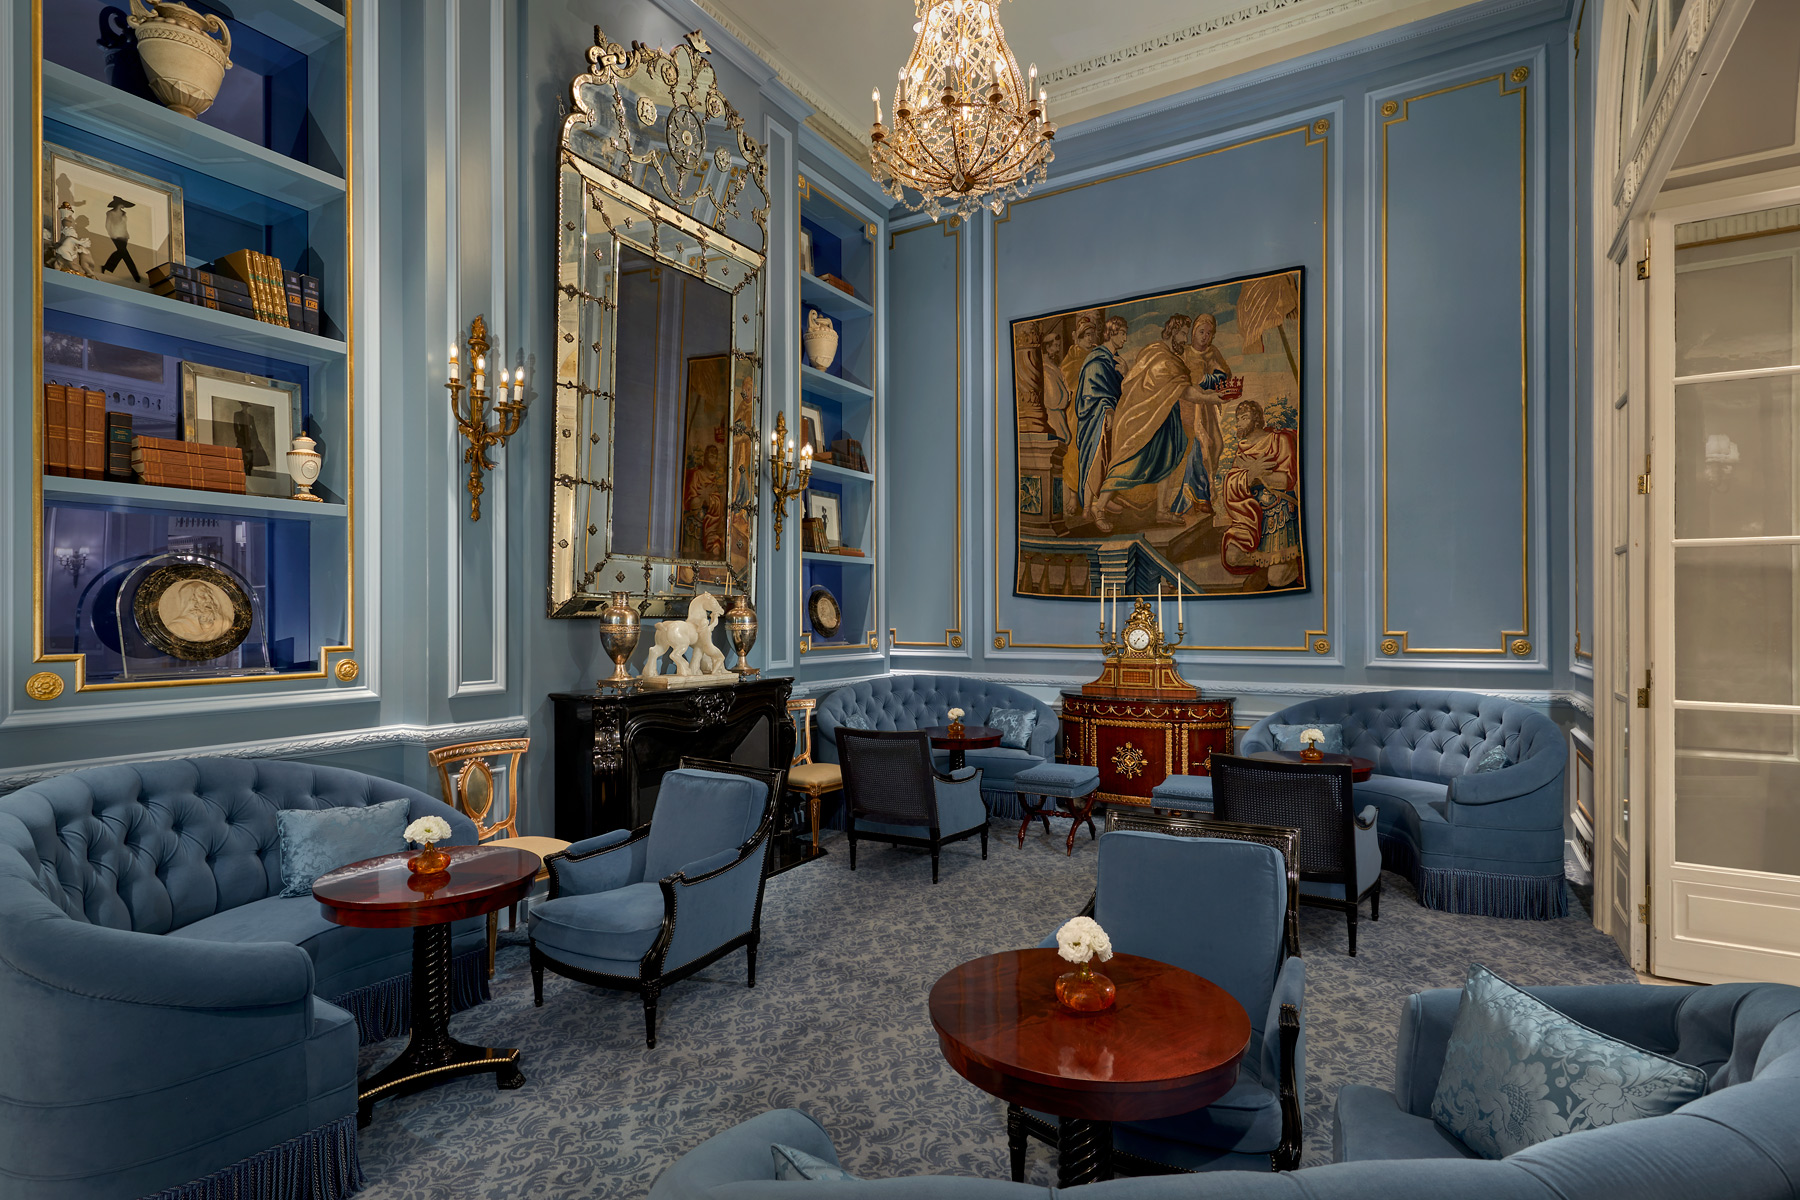 The new St. Regis Rome's gorgeous powder-blue hotel library.